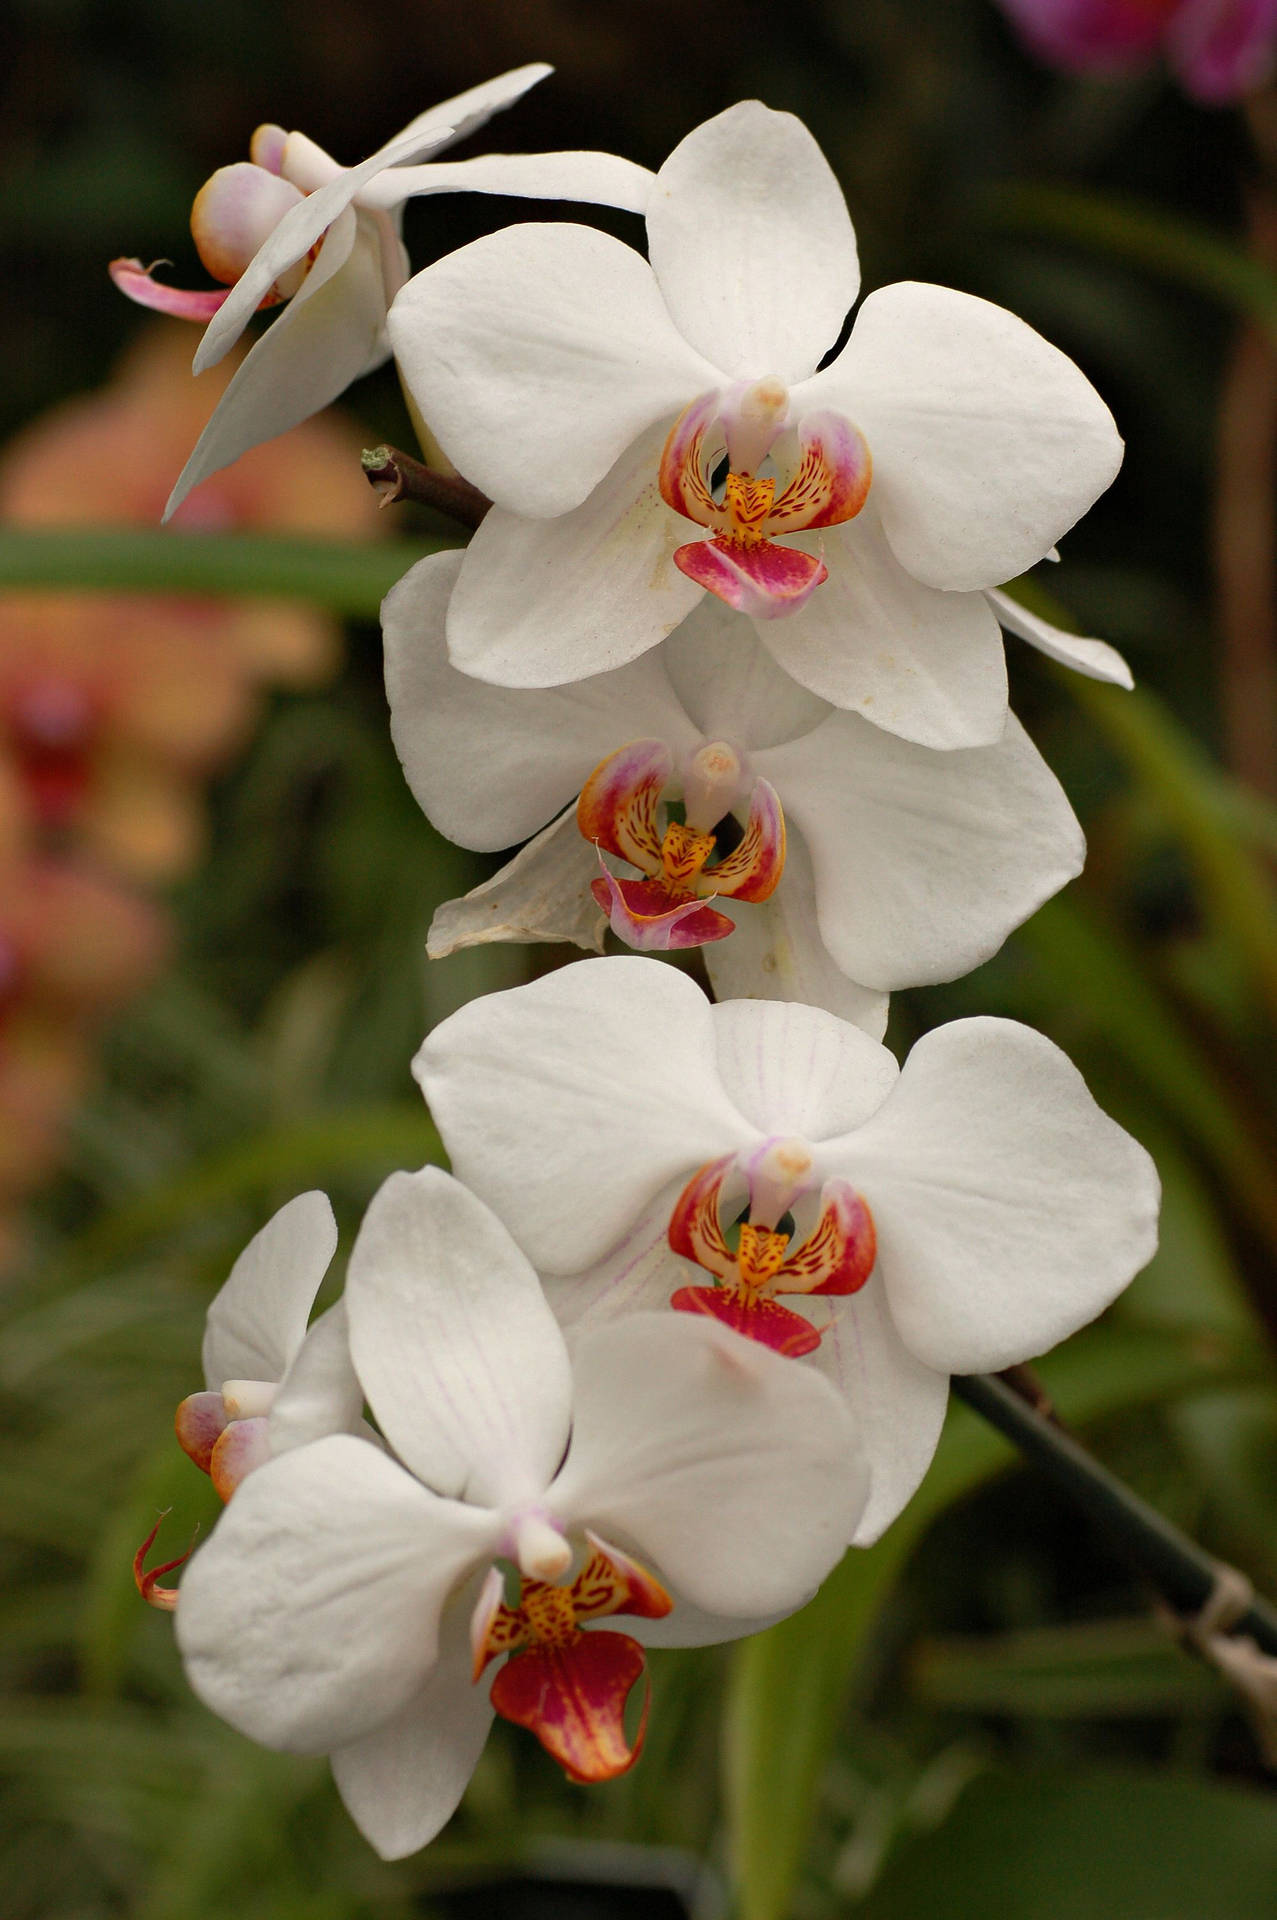 White Orchids With Red Center Petals Wallpaper